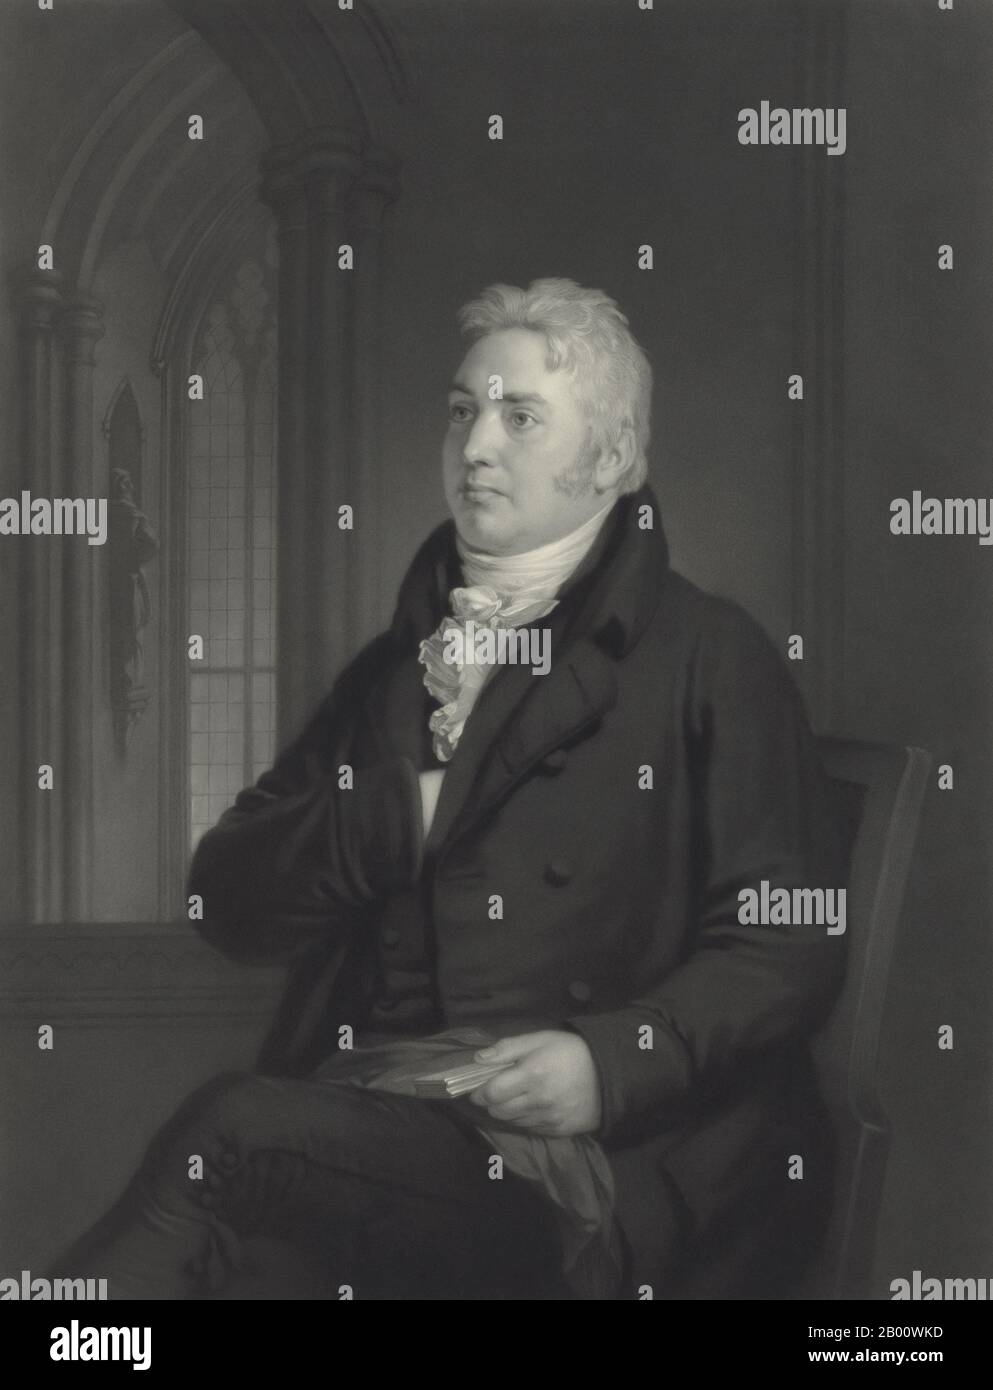 England: 'Samuel Taylor Coleridge at Age 42'. Mezzotint print by Samuel Cousins (1801-1887), 1854.  An engraving of English philosopher and poet Samuel Taylor Coleridge (1772–1834), most famous for his poems The Rime of the Ancient Mariner and Kubla Khan. Coleridge was a member of the Lake Poets who, with his friend William Wordsworth, founded the Romantic Movement in England. He also helped introduce German idealism to English-speaking culture and was influential on American transcendentalism (via Ralph Waldo Emerson). Stock Photo